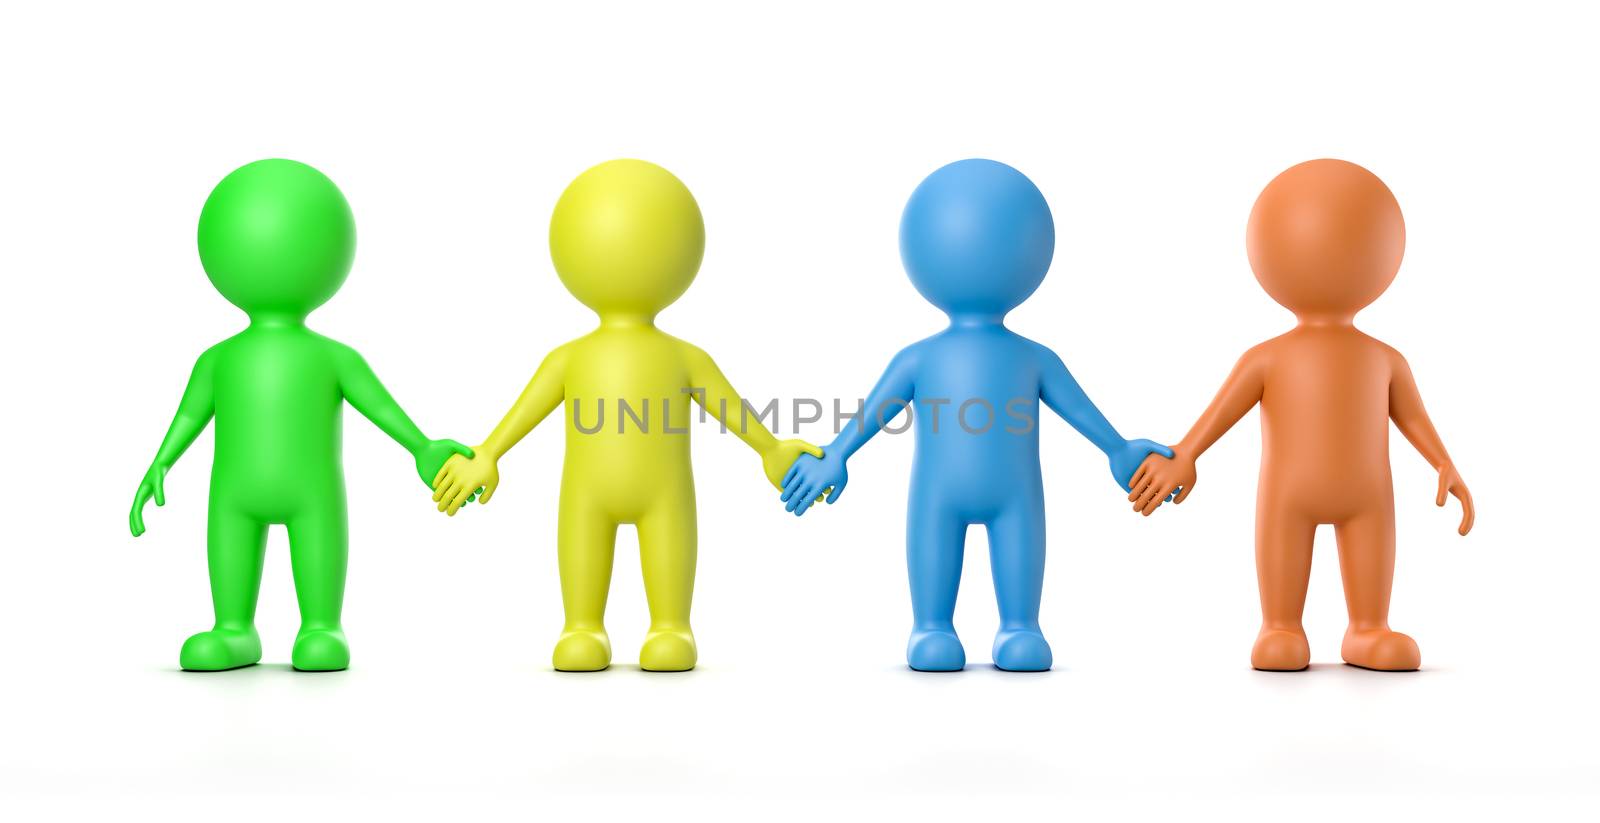 Four Multicolor Human 3D Characters Holding Hands Illustration on White Background